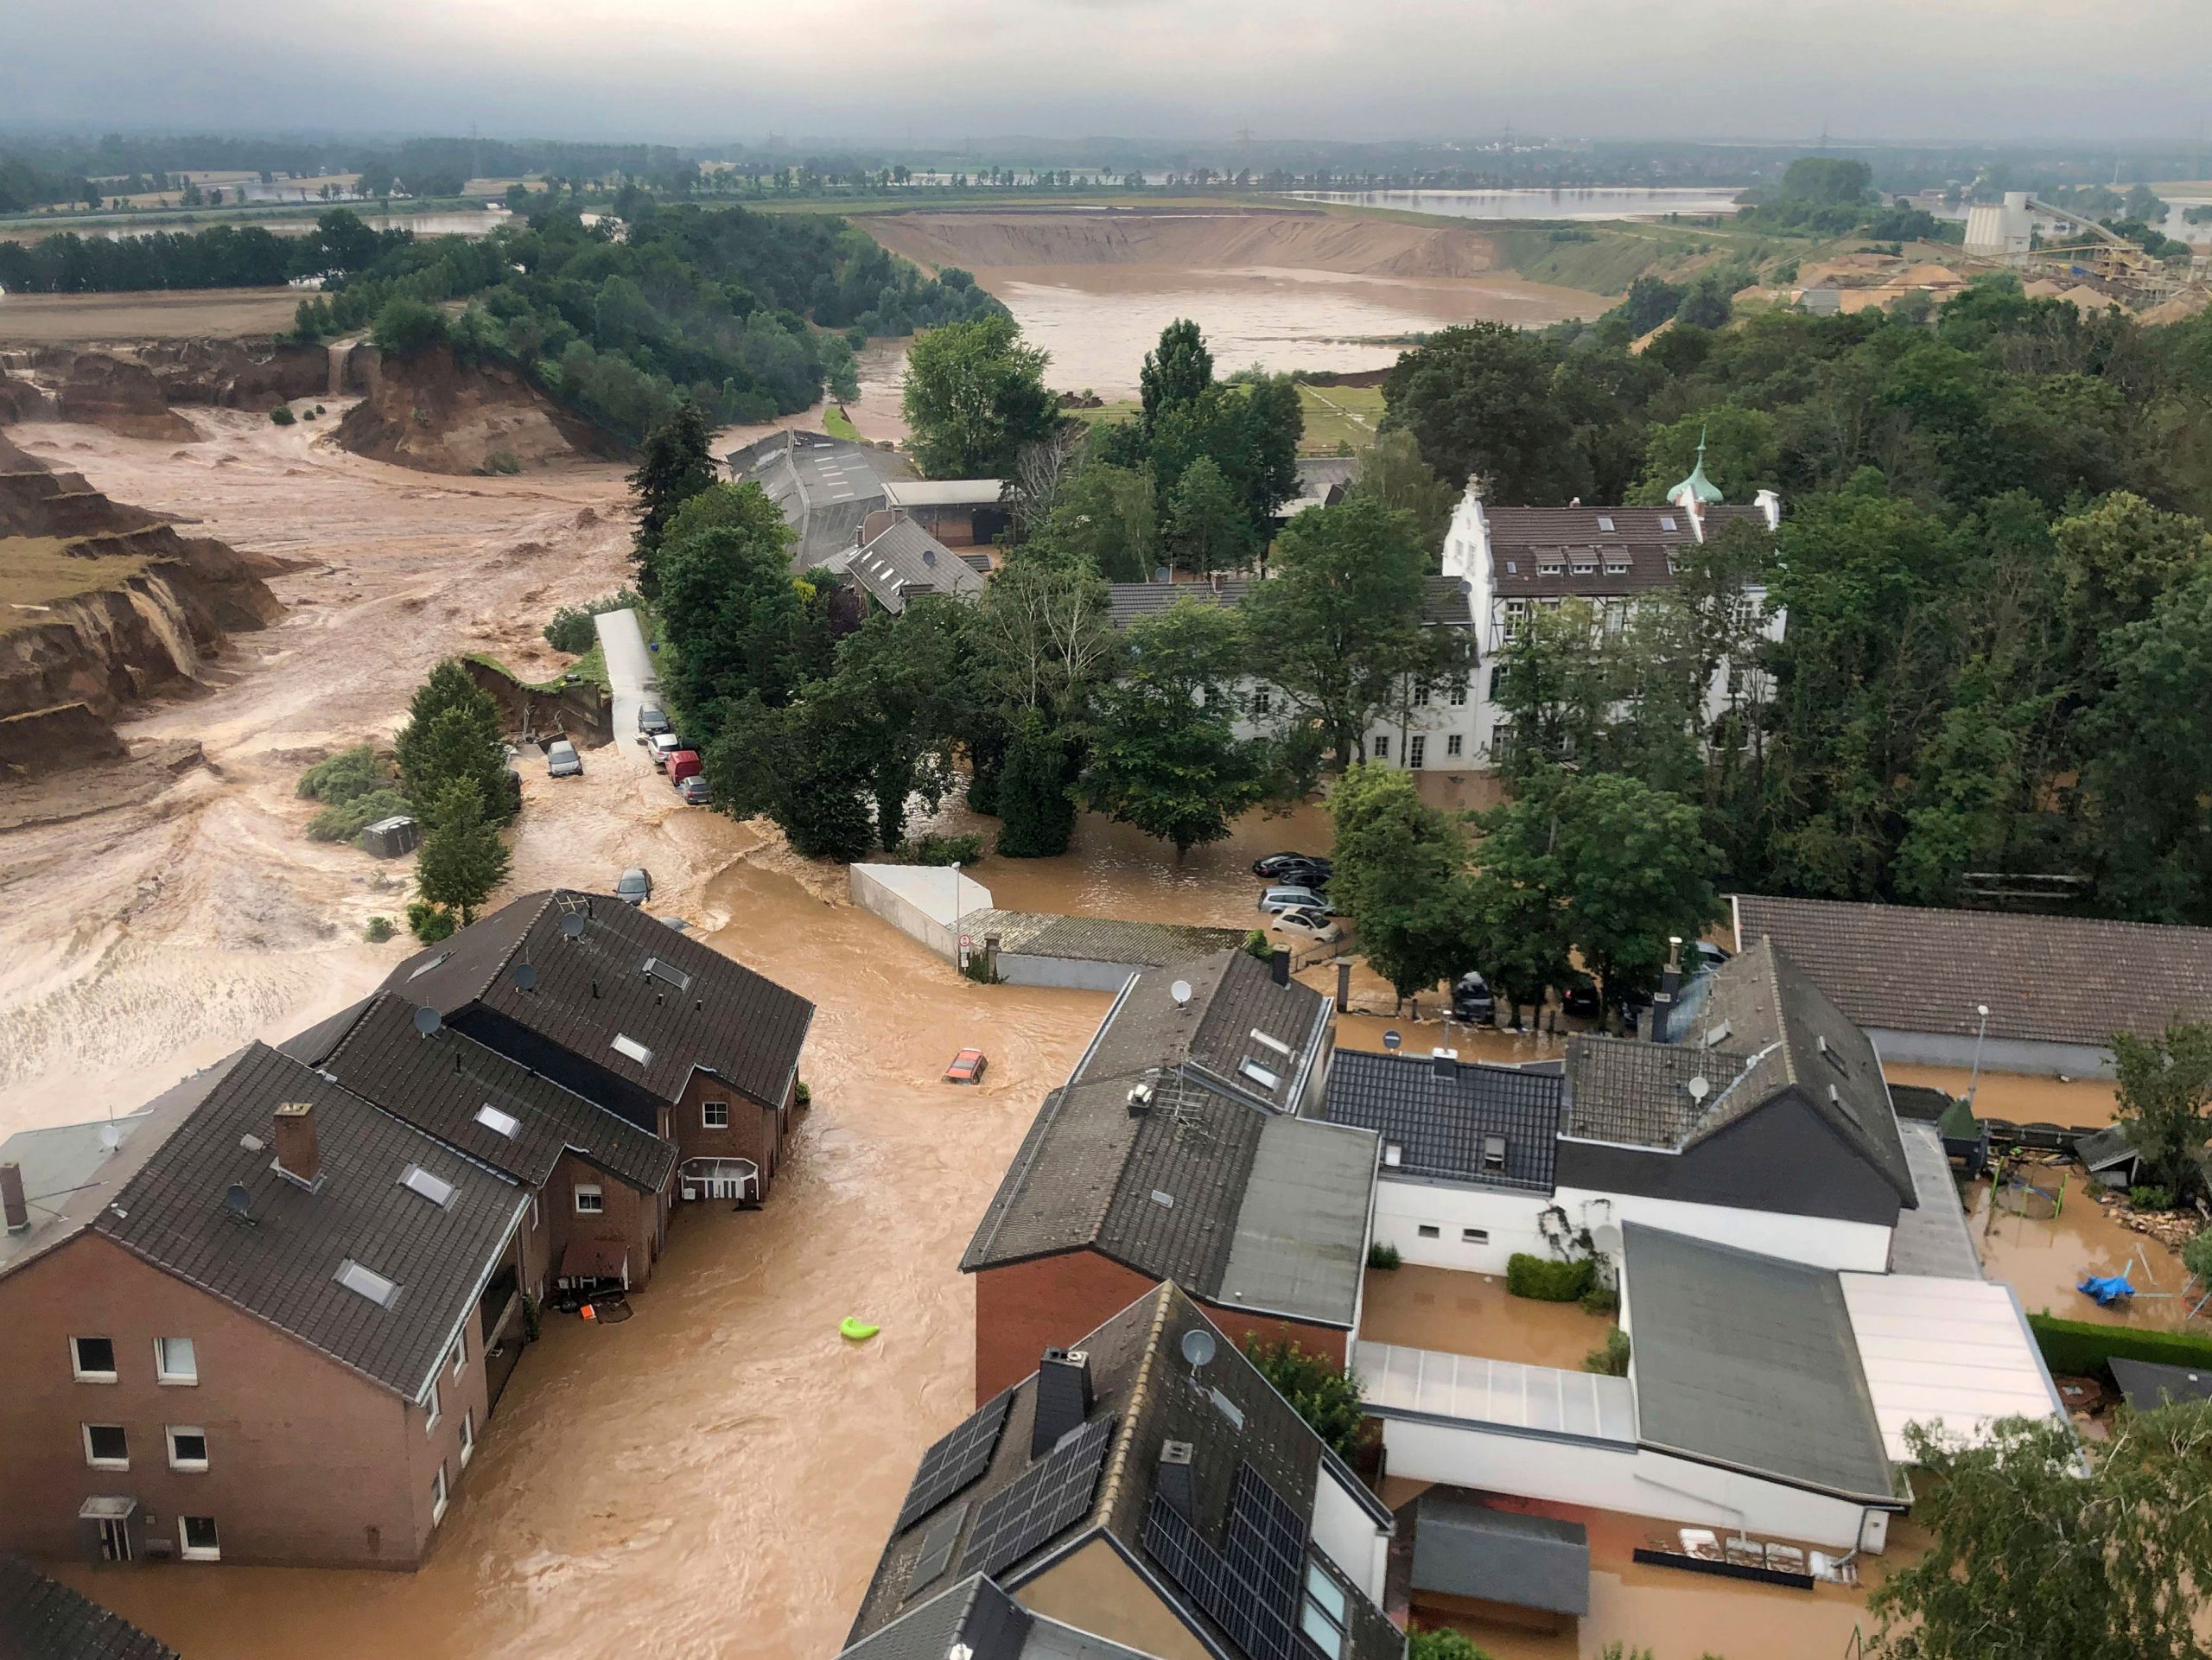 Germany floods: Death toll tops 180, Angela Merkel to visit affected areas